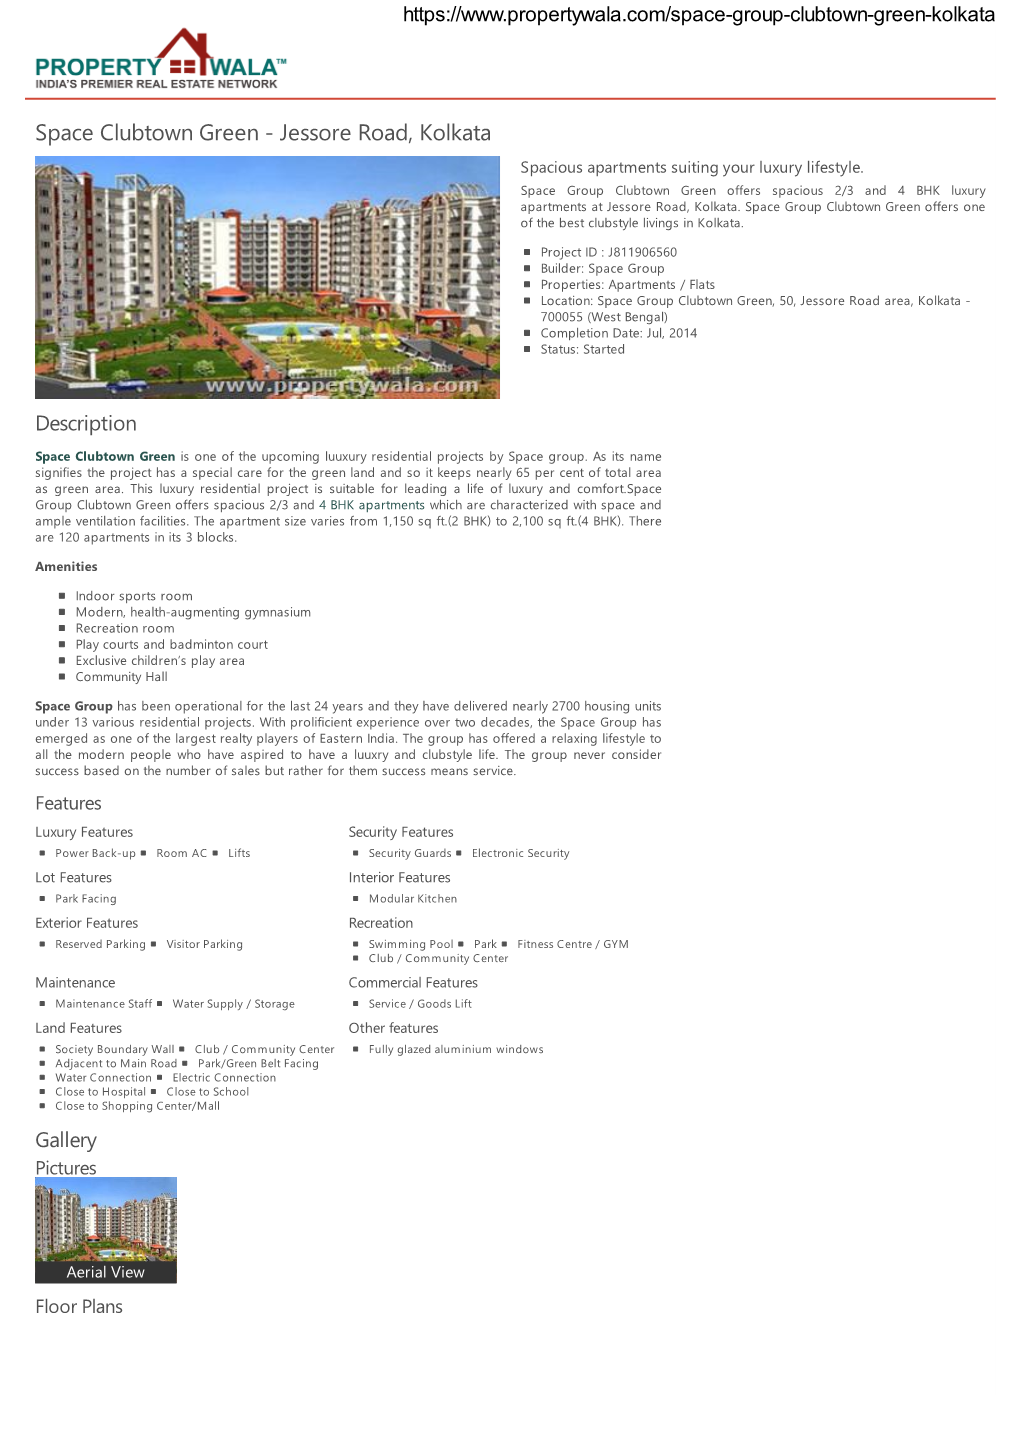 Space Clubtown Green - Jessore Road, Kolkata Spacious Apartments Suiting Your Luxury Lifestyle